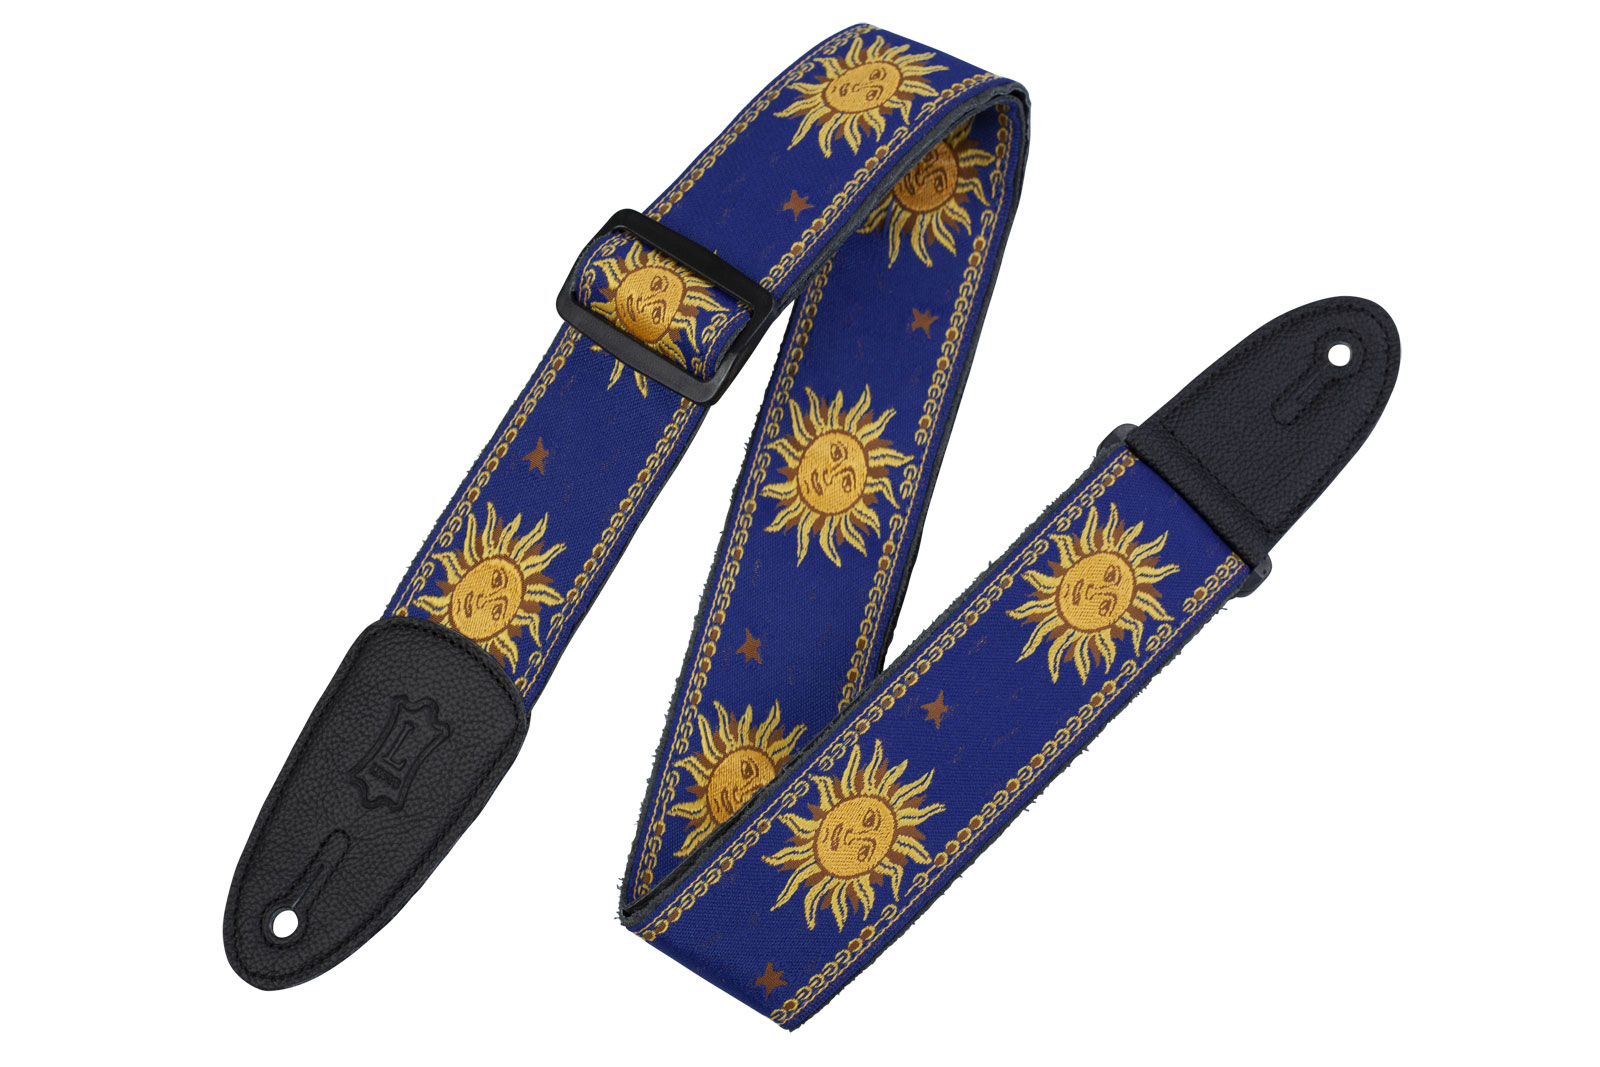 LEVY'S 5 CM POLYPROPYLENE & LEATHER WITH BLUE SUN PATTERNS